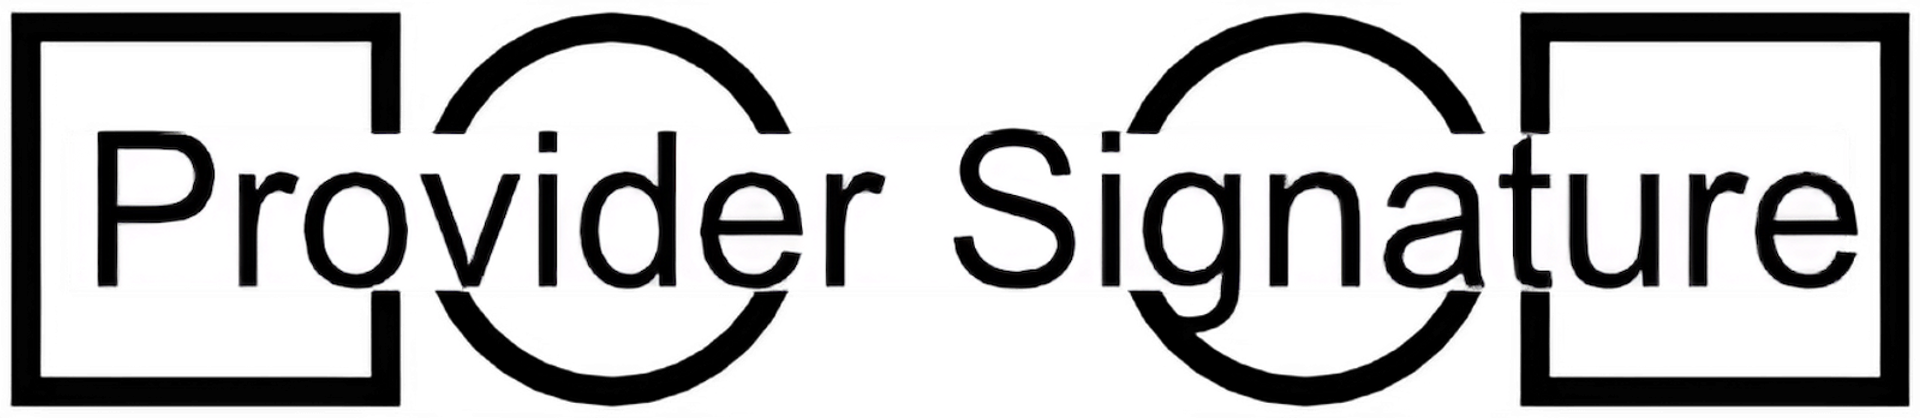 A black and white logo labeled 'Provider Signature'